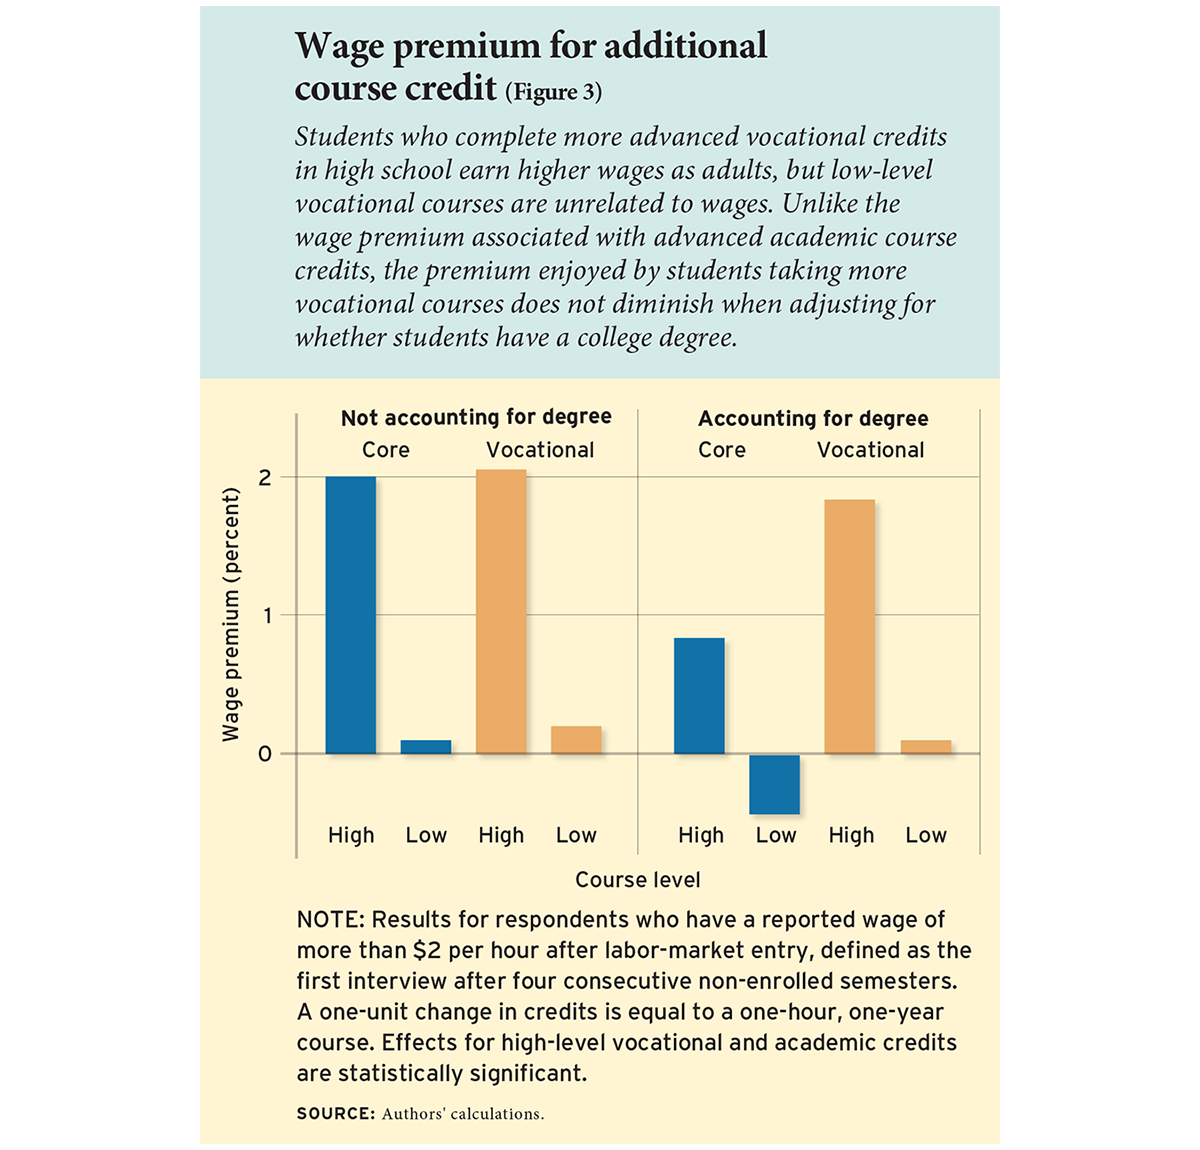 Wage premium for additional course credit (Figure 3)